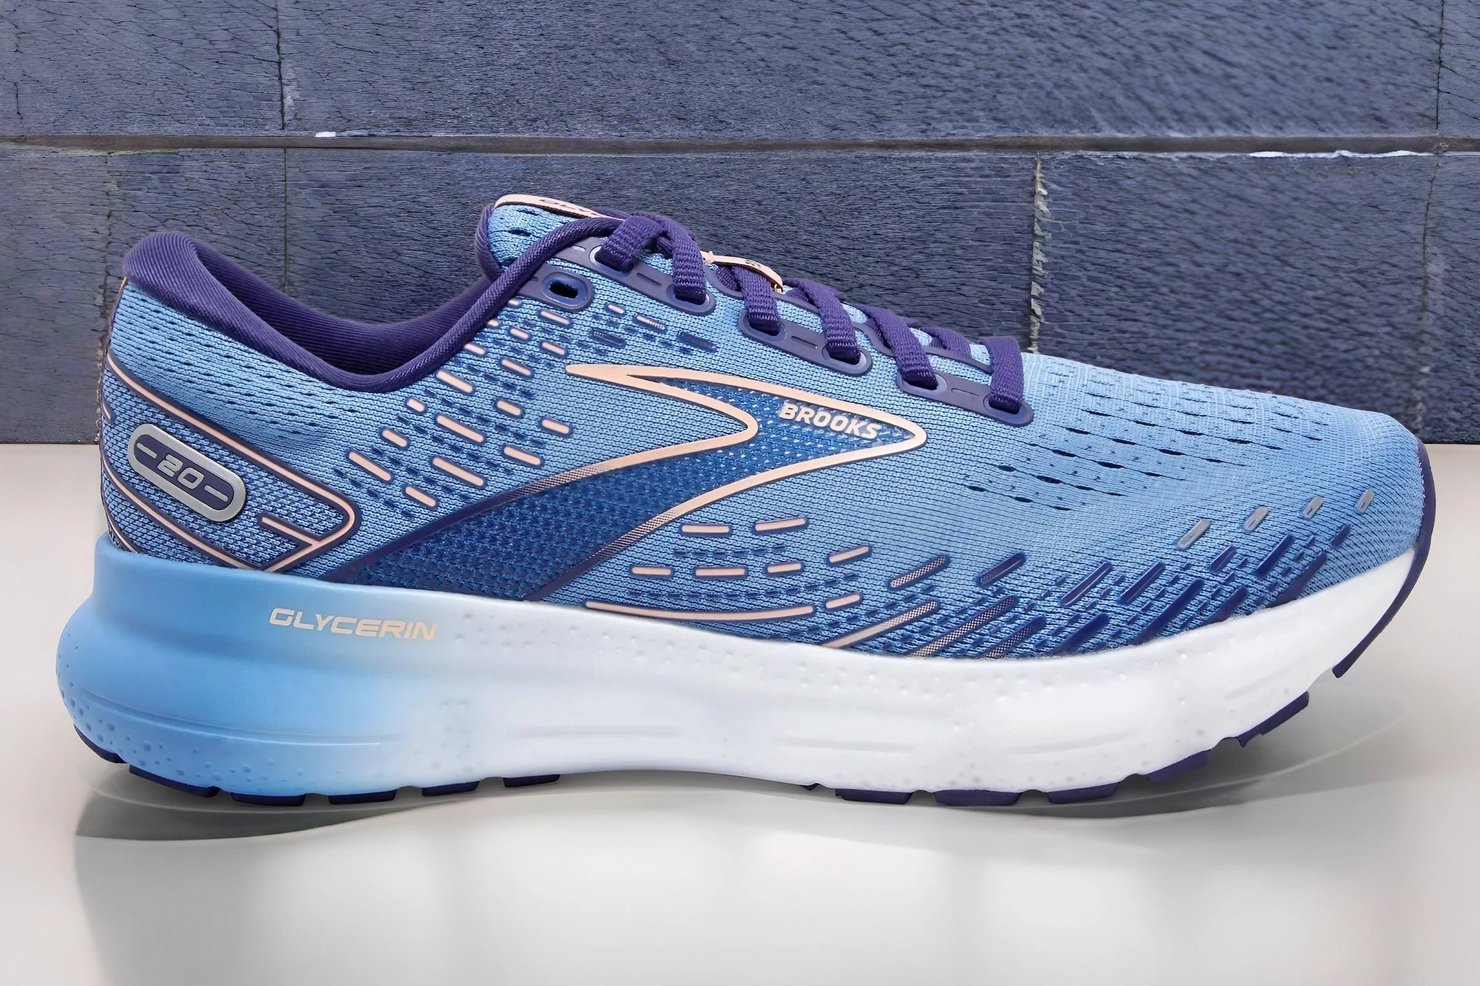 The Brooks Glycerin 20 running sneaker from a side view.